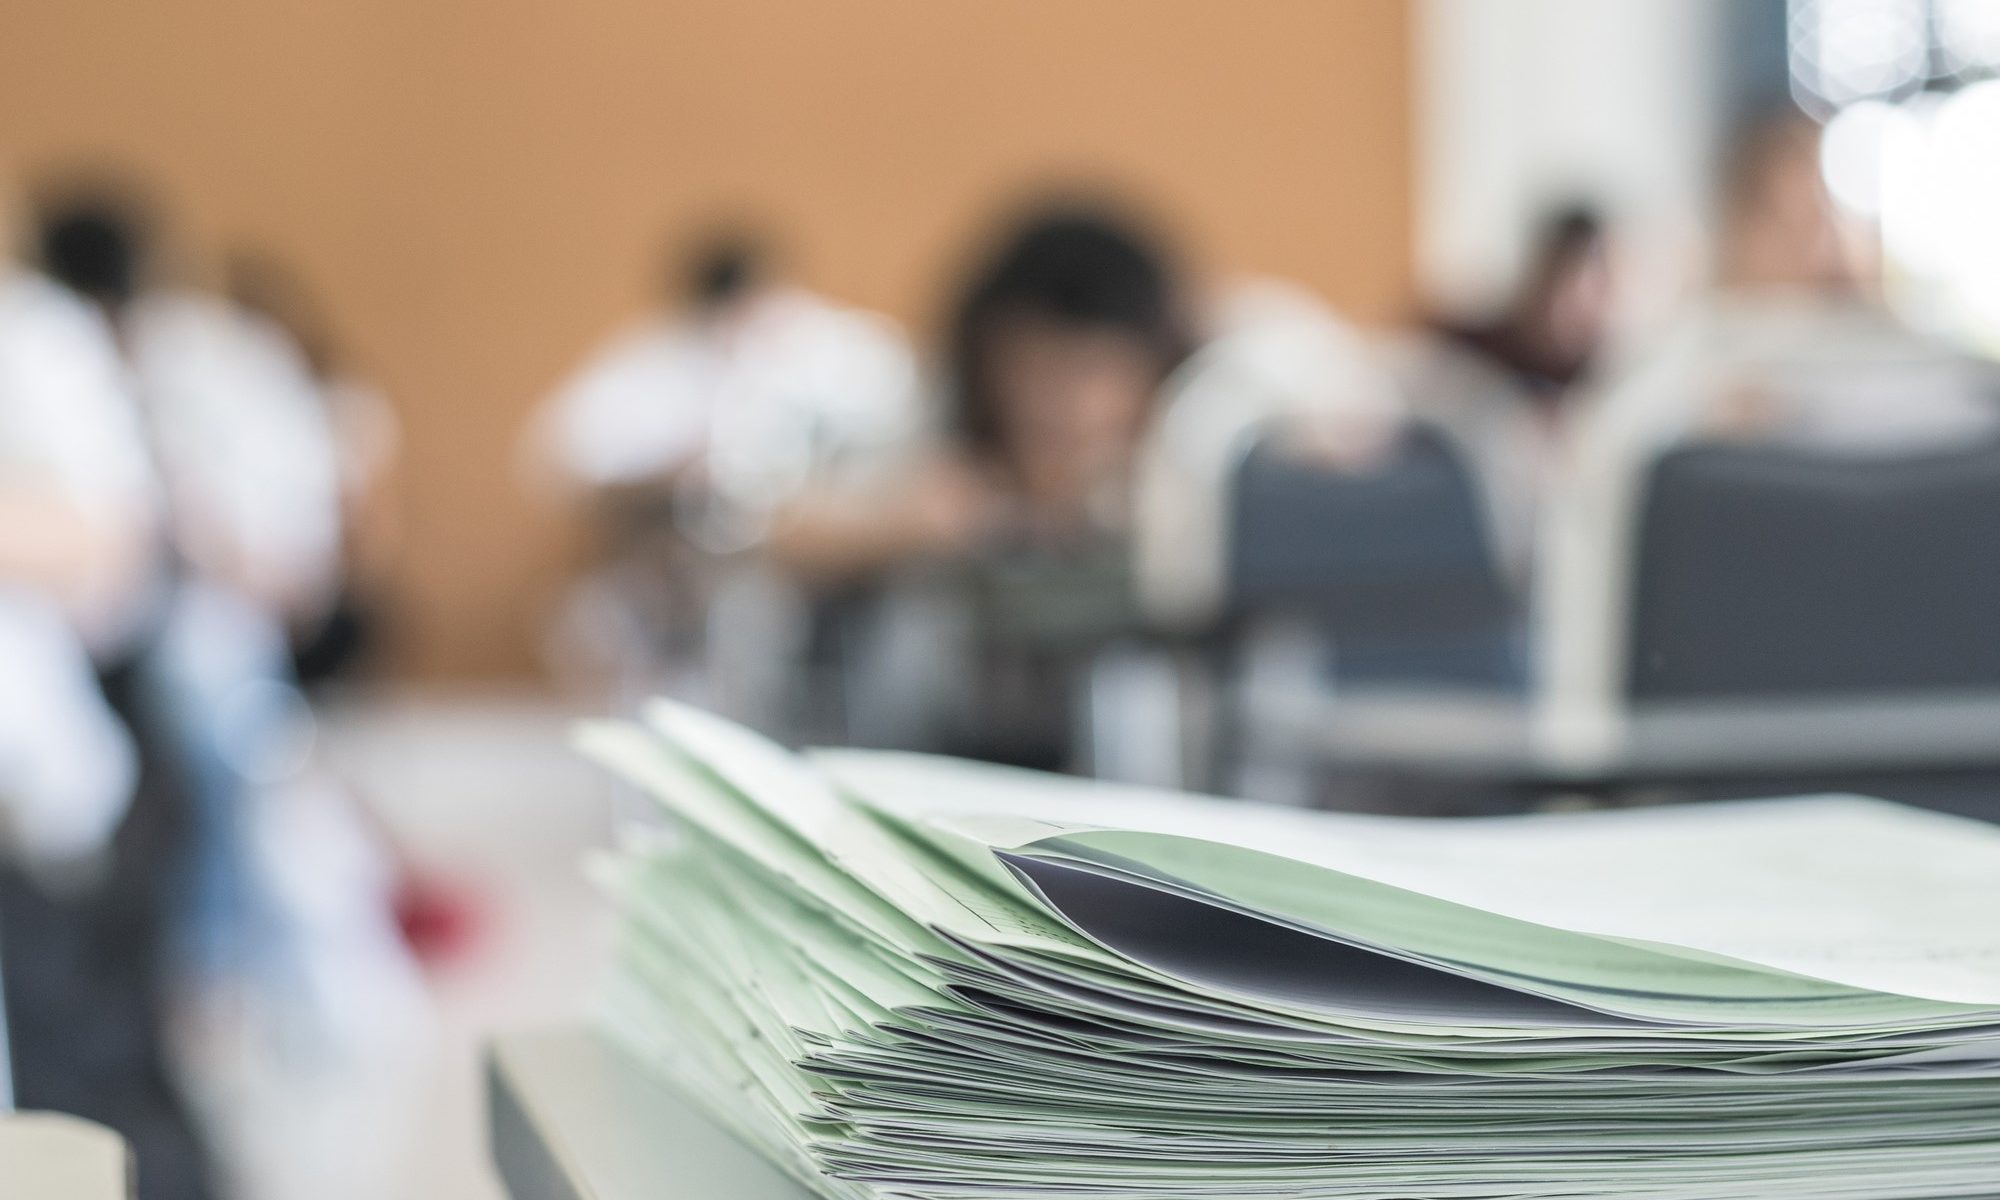 photograph of exams stacked on desk at front of class